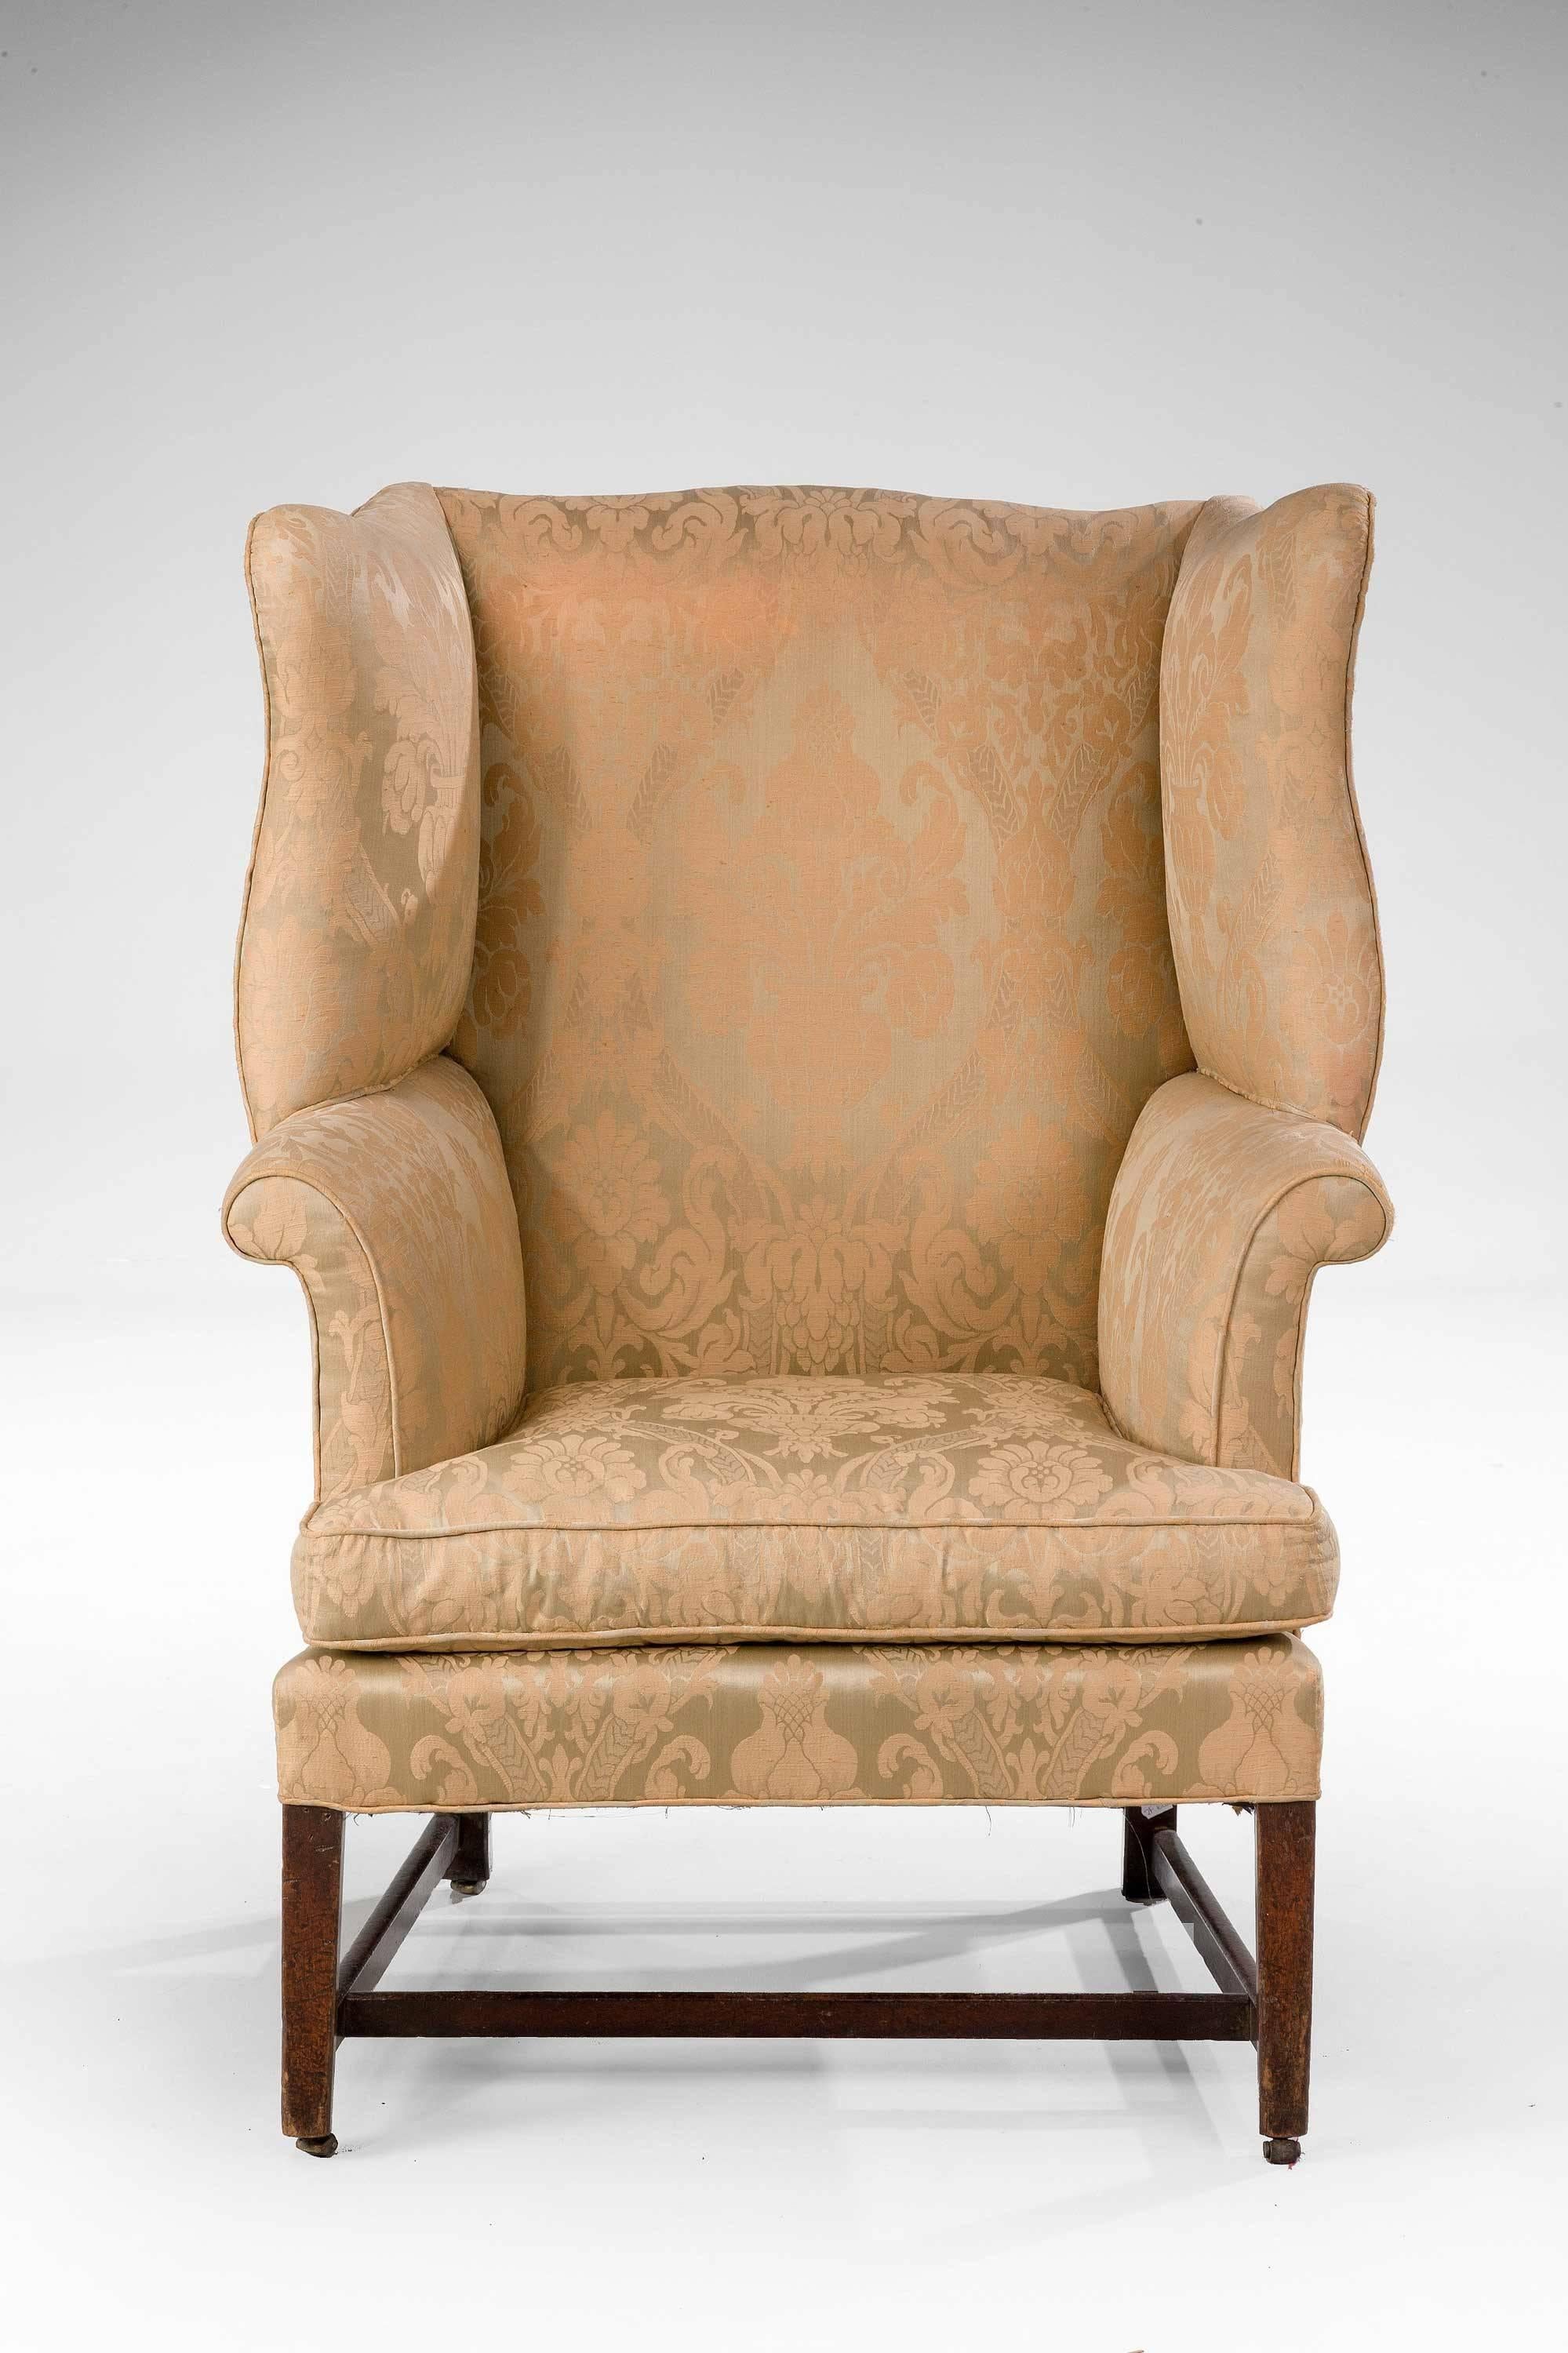 English George III Period Wing Chair with Serpentine Wings